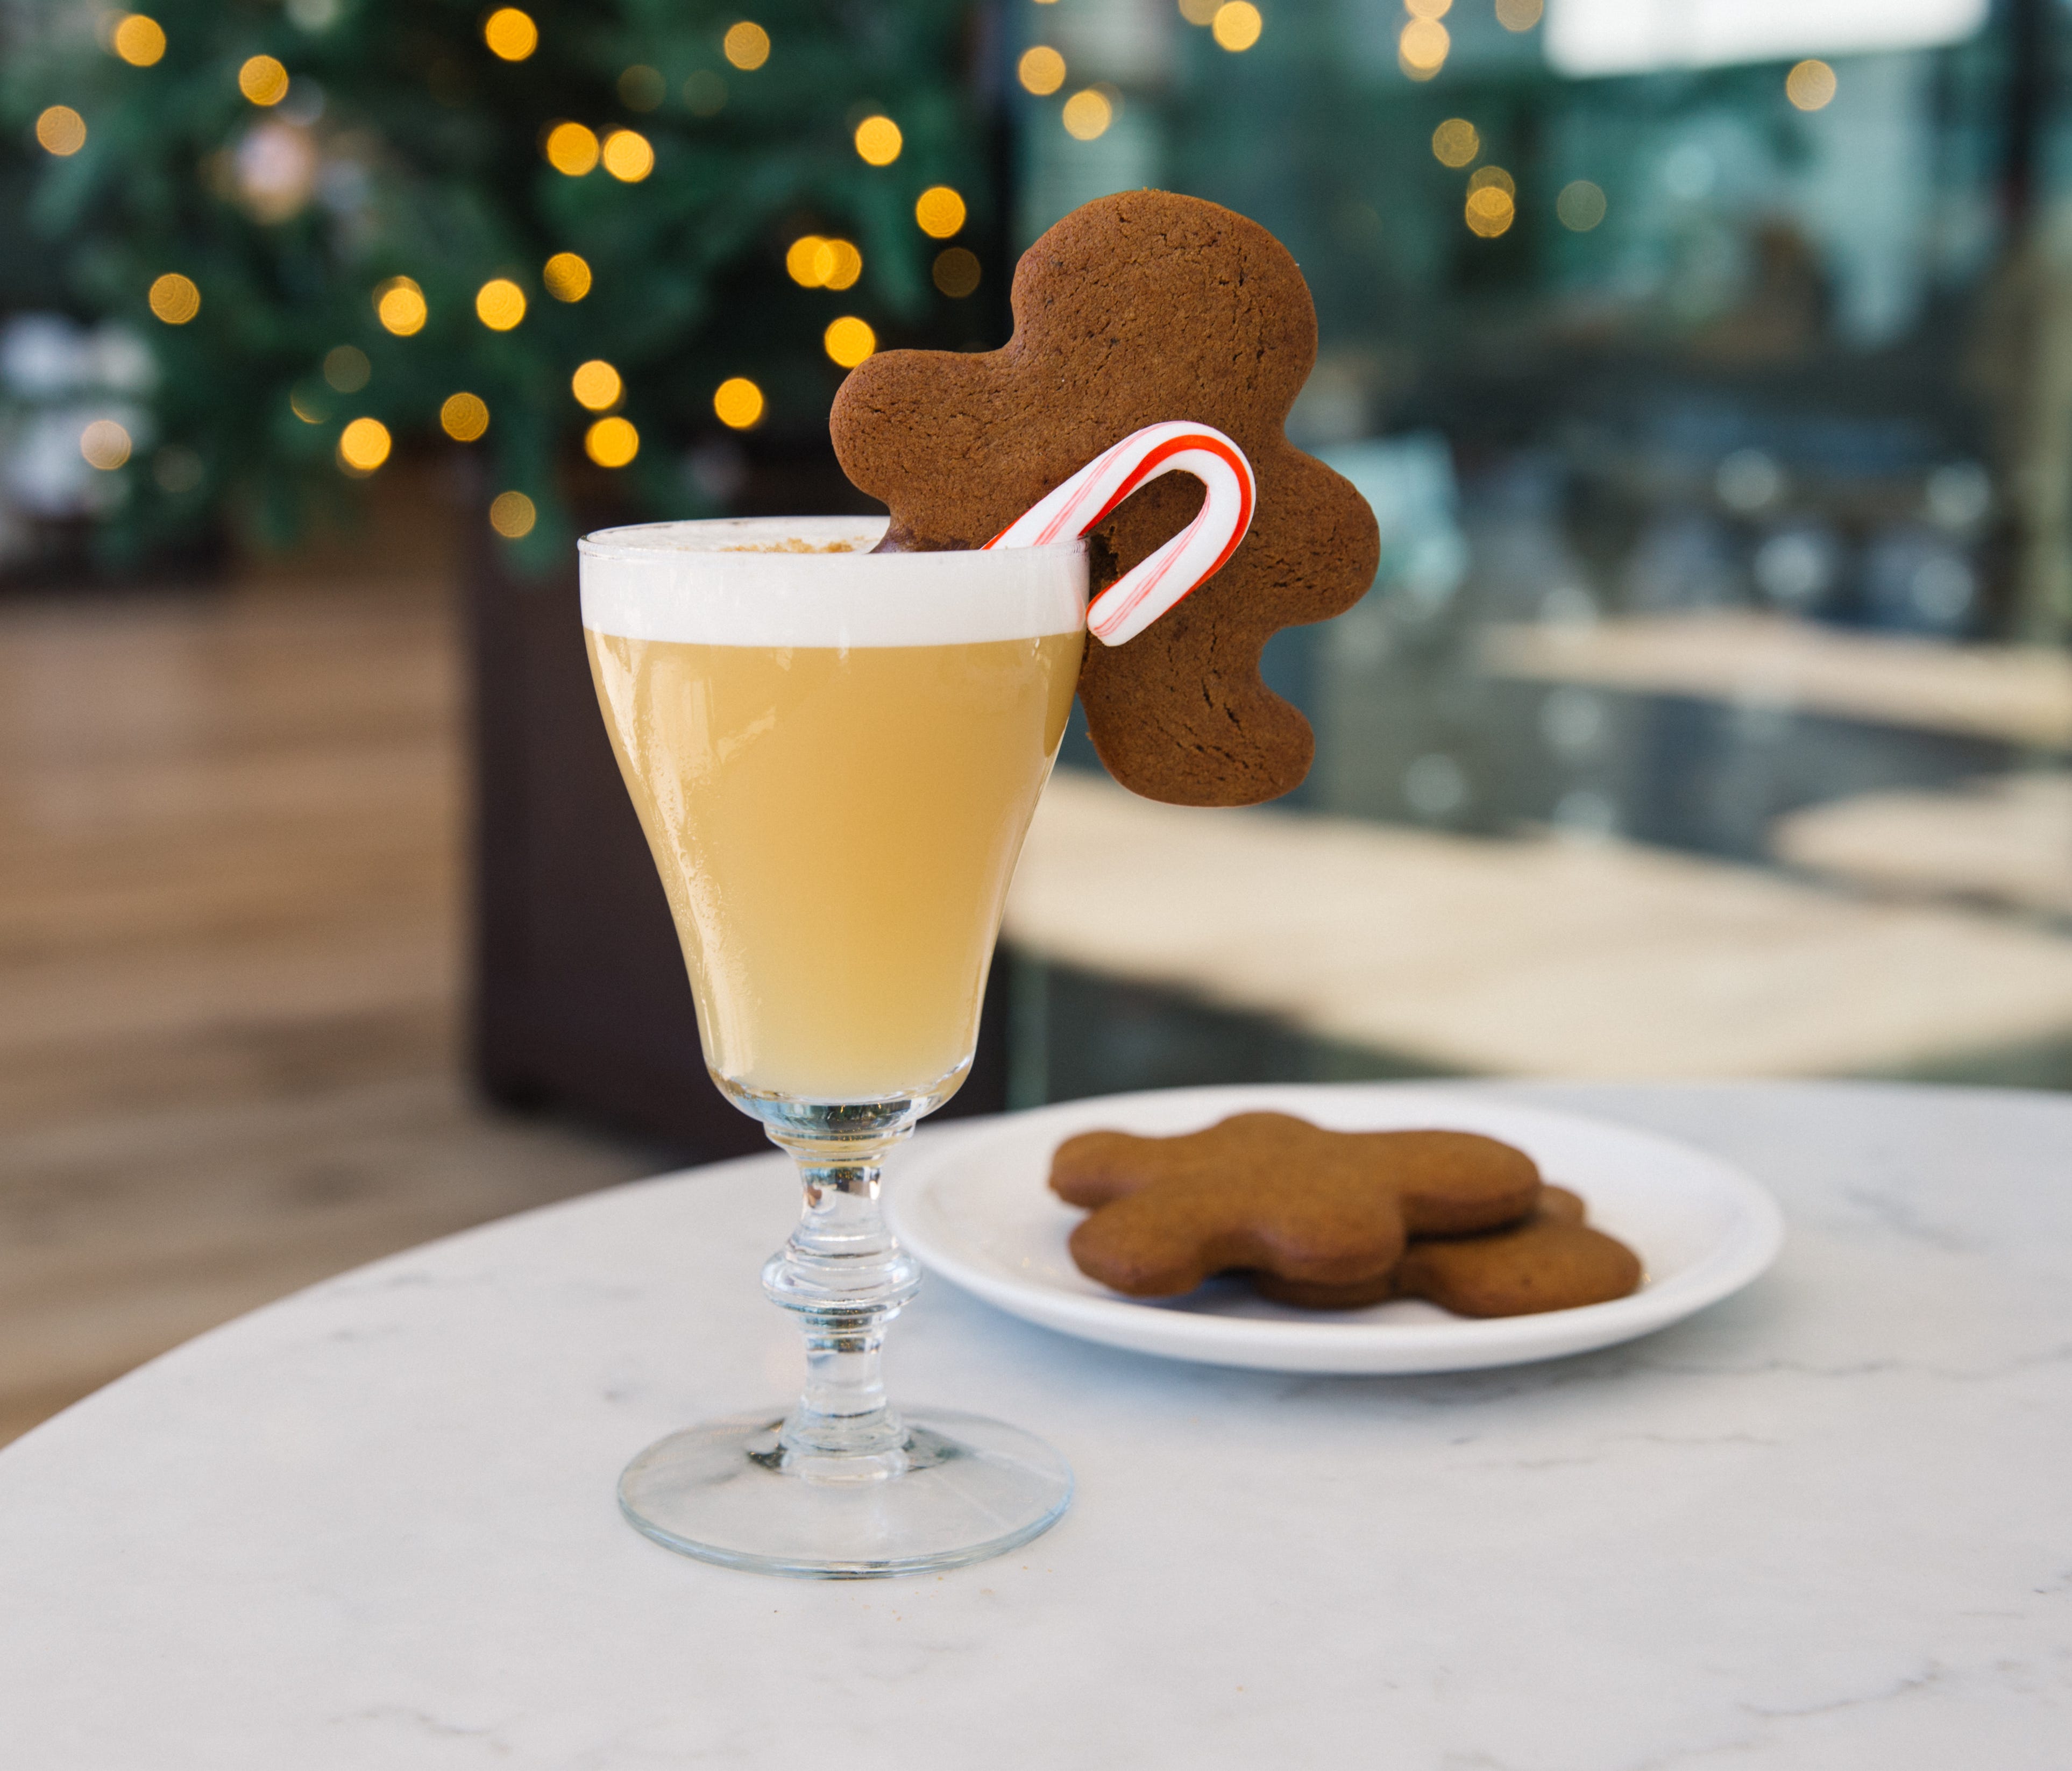 At Ever Bar in Hollywood, lead bartender Dan Rook makes The Ginger Man with Bols Genever, Faretti Biscotti Famosi, Bonolli o'f Amaro, absinthe, ginger, cinnamon and gingerbread crumbs, a gingerbread cookie and a mini candy cane.